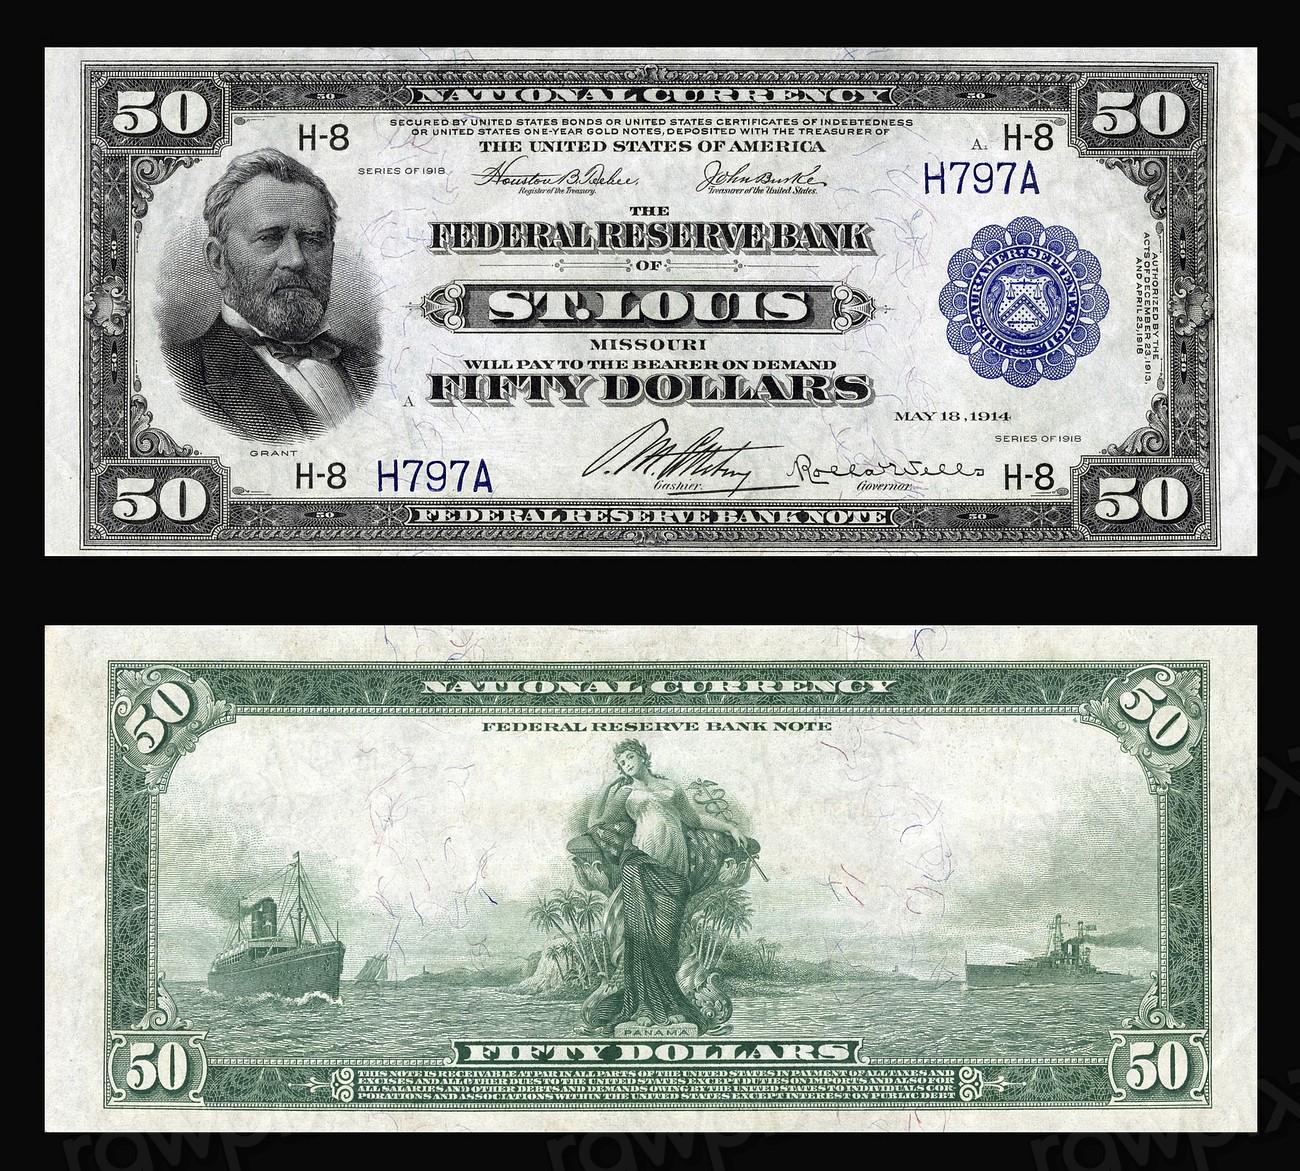 $50 Federal Reserve Bank Note